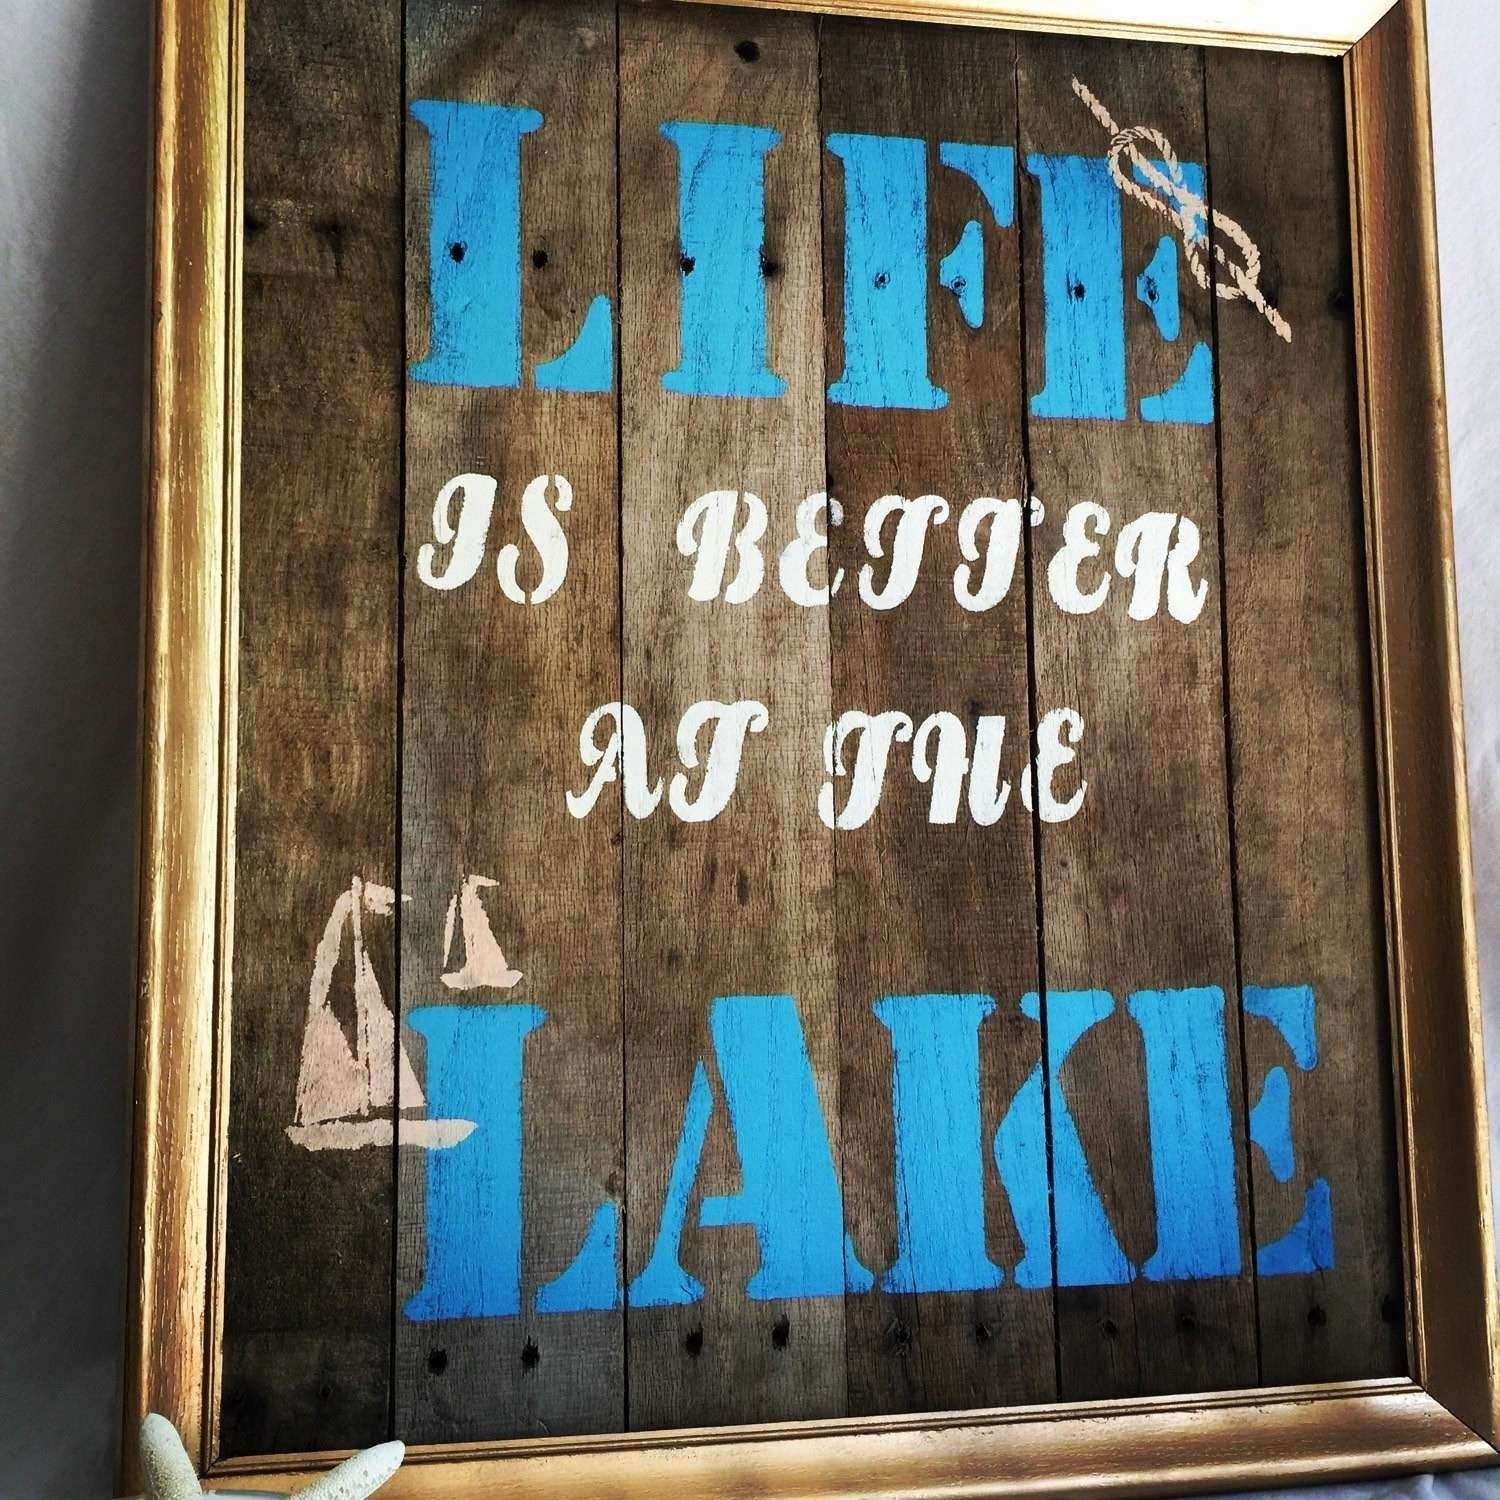 Lake House Wall Art Awesome Unavailable Listing On Etsy | Wall Art Ideas With Lake House Wall Art (View 20 of 20)